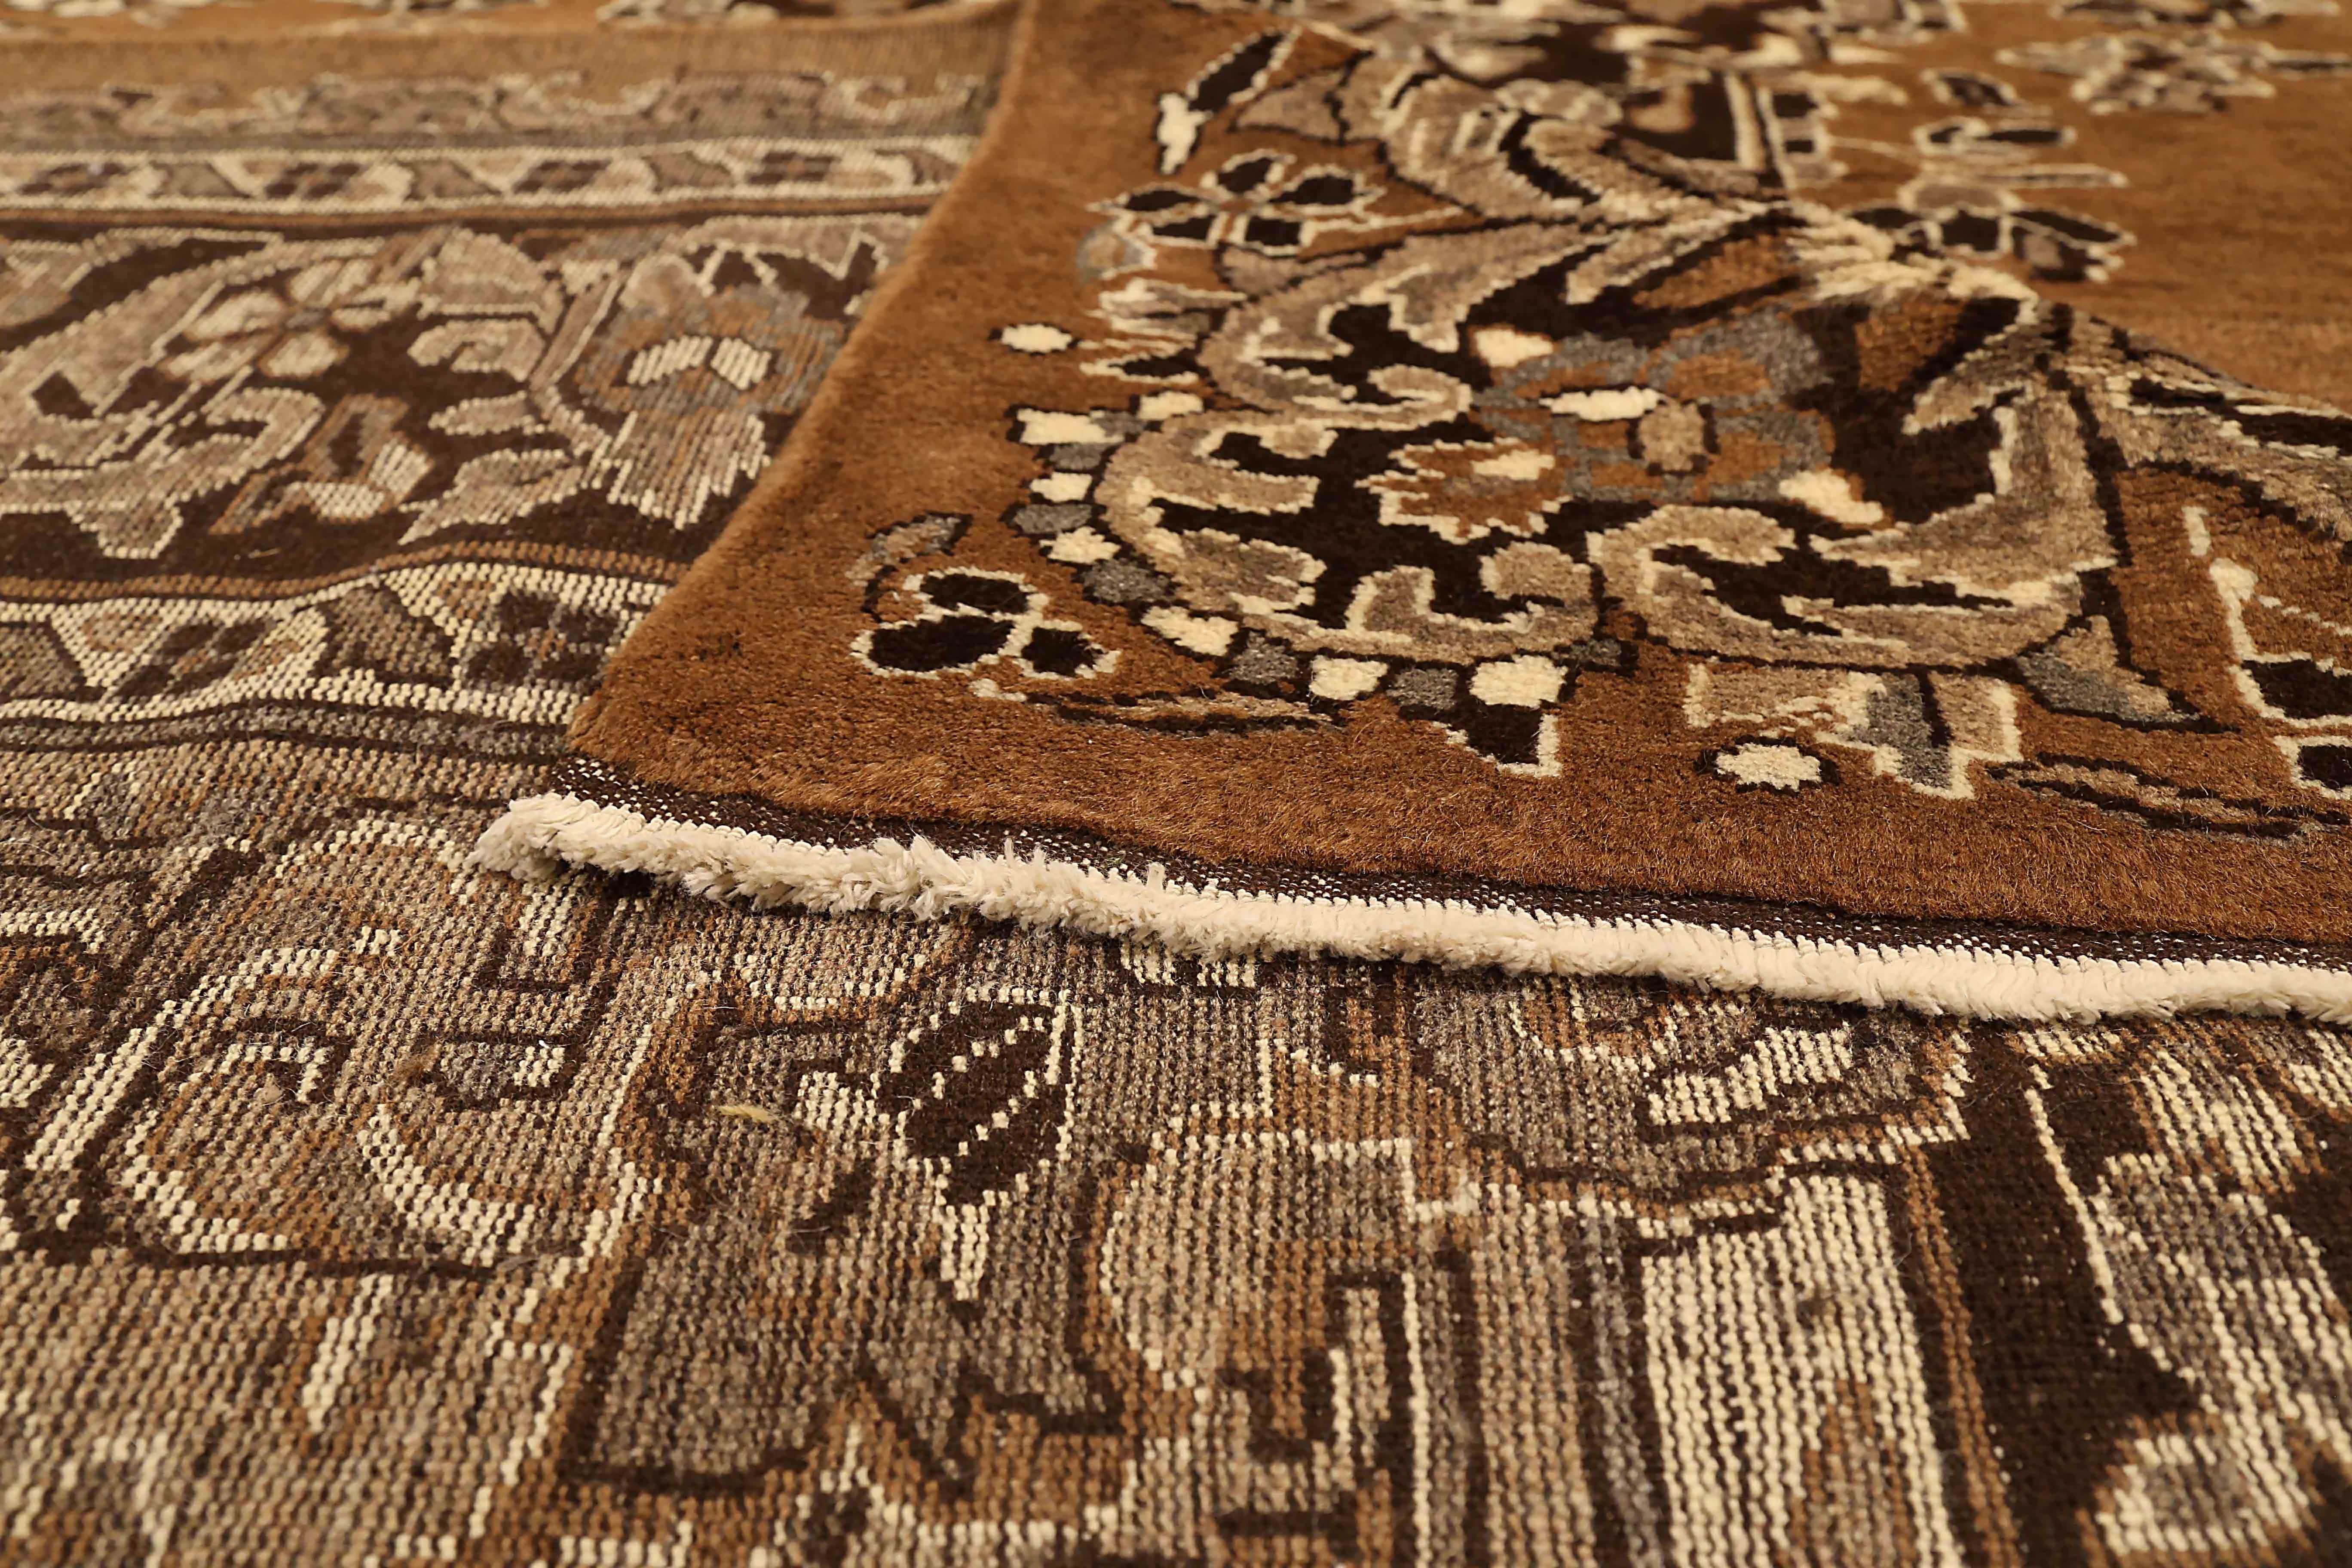 Hand-Woven Antique Persian Area Rug Mashad Design For Sale